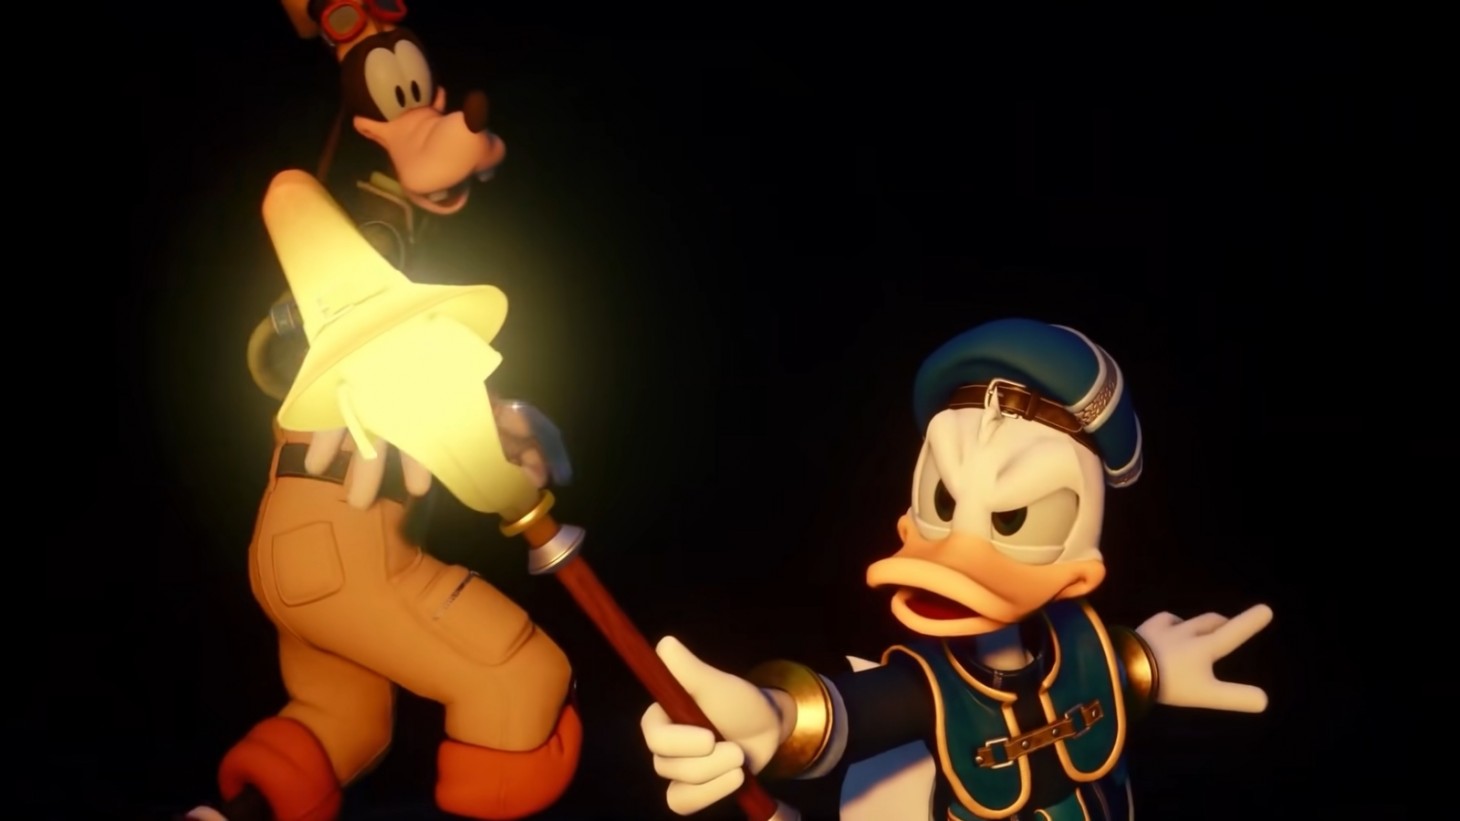 Kingdom Hearts: Missing Link Will Feature Character Creation